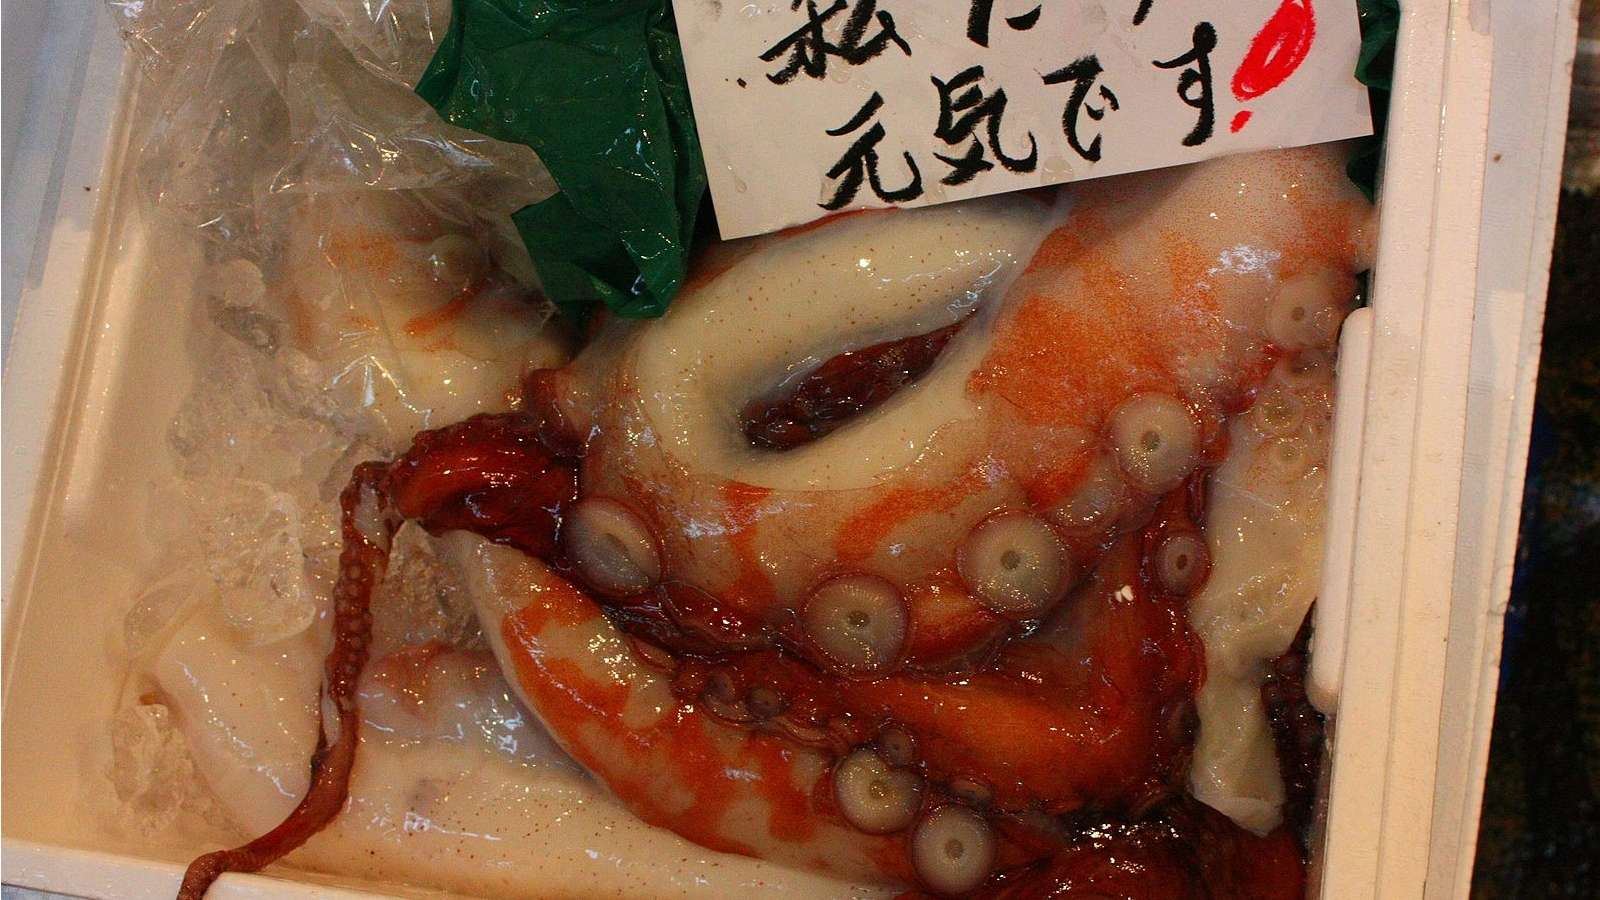 Image shows octopus tentacles in carton.